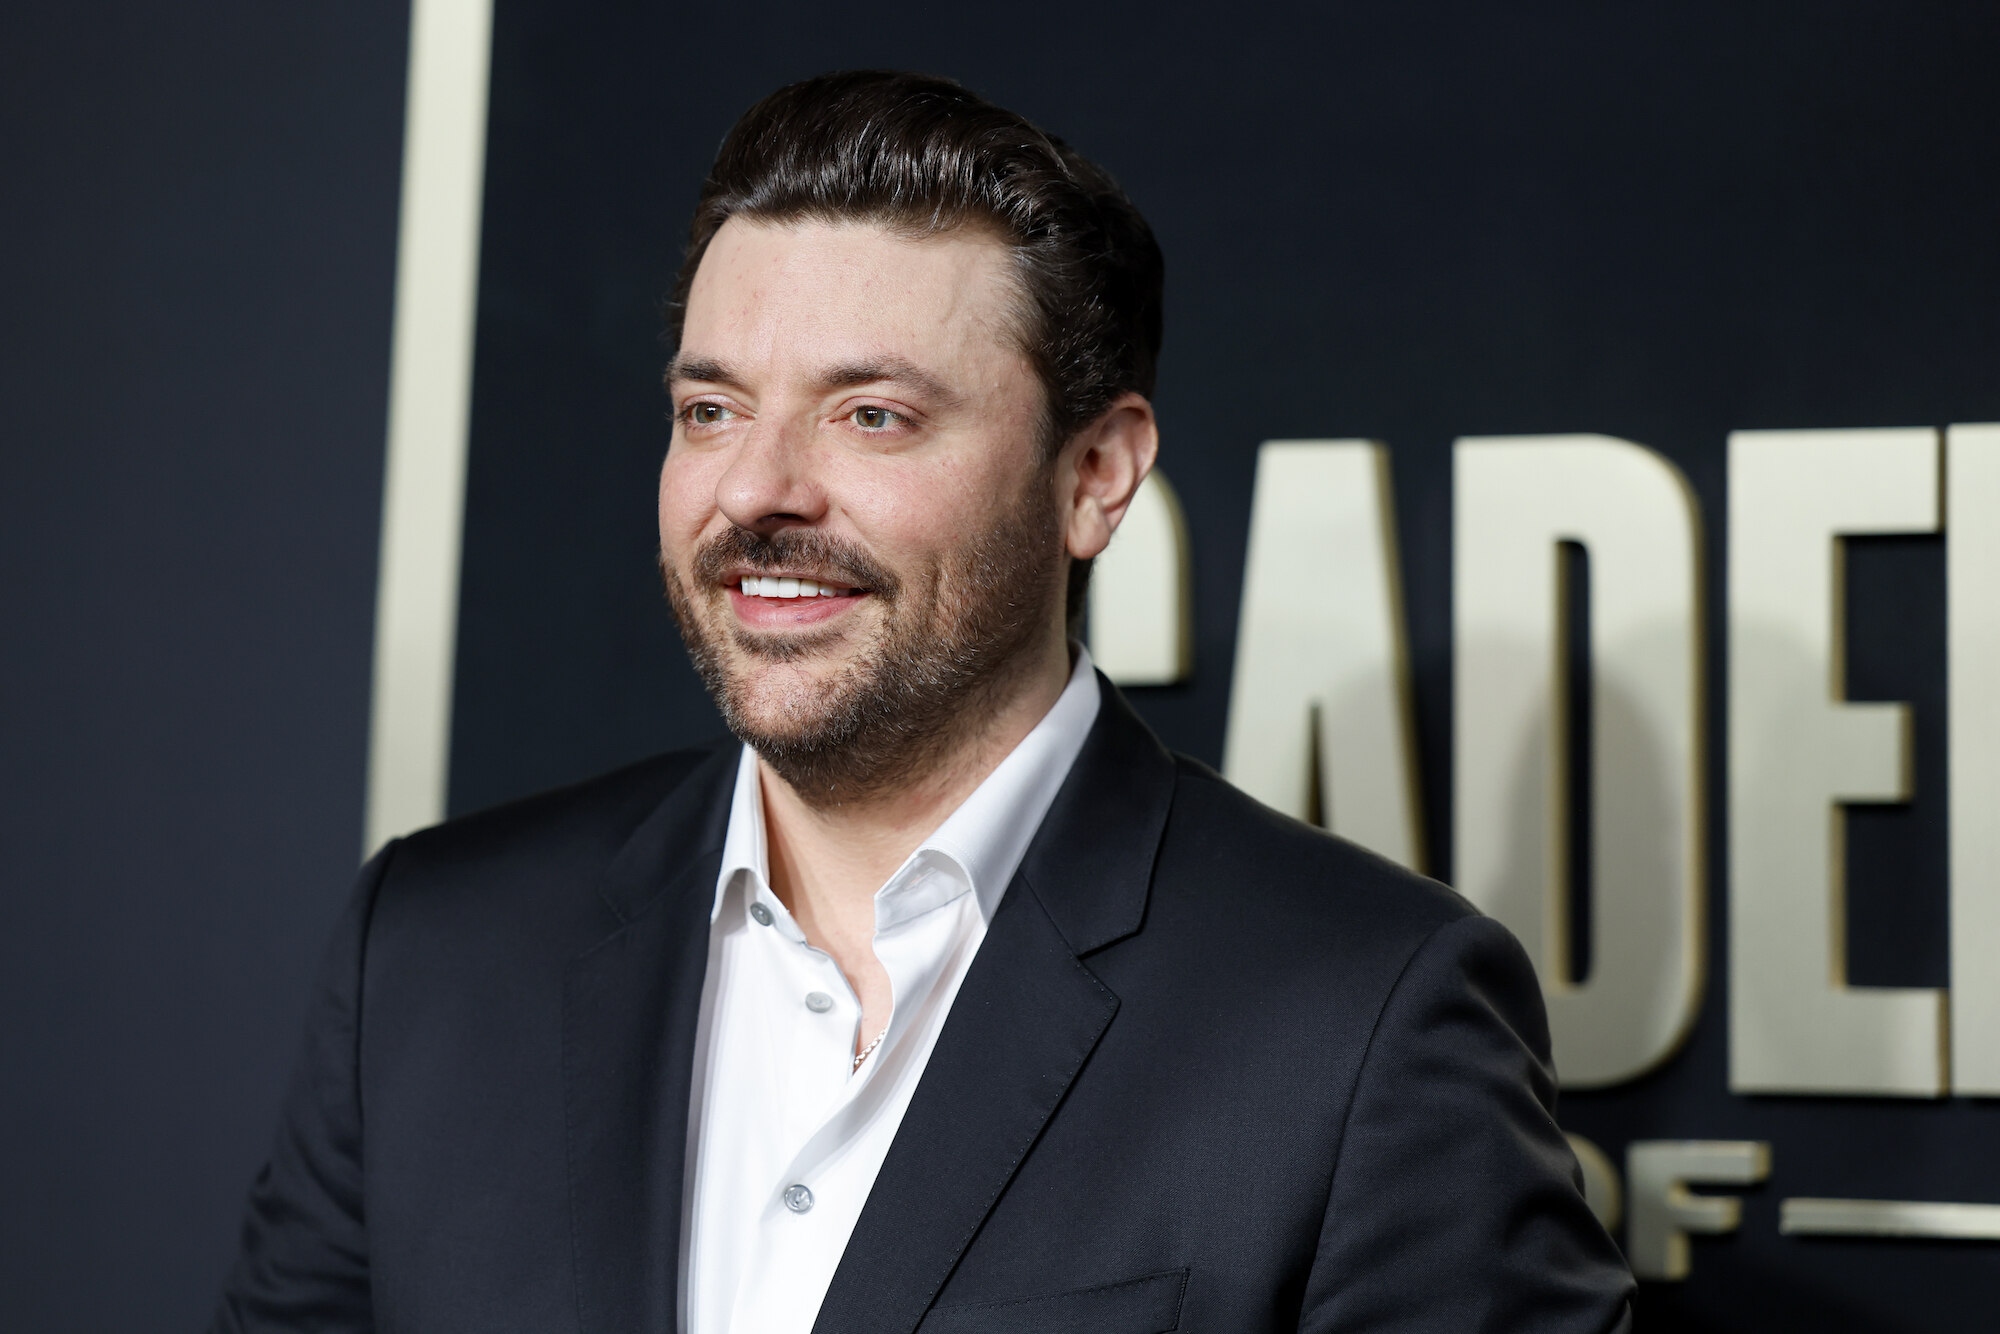 Country Singer Chris Young Arrested After Altercation With Officials At Nashville Bar